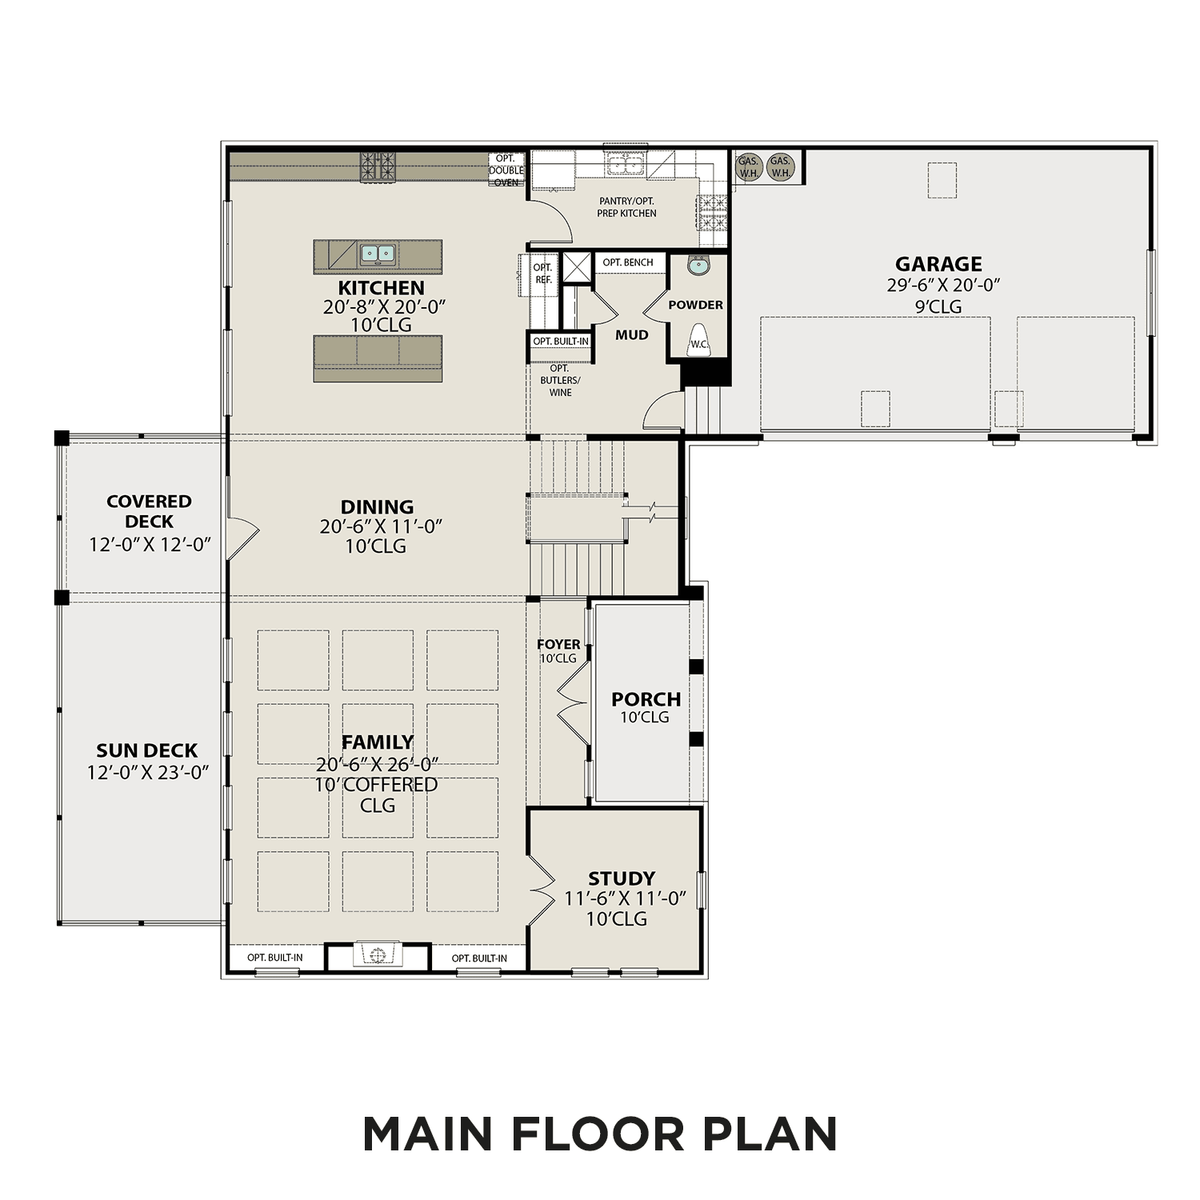 1 - The Alston A buildable floor plan layout in Davidson Homes' Shelton Square community.